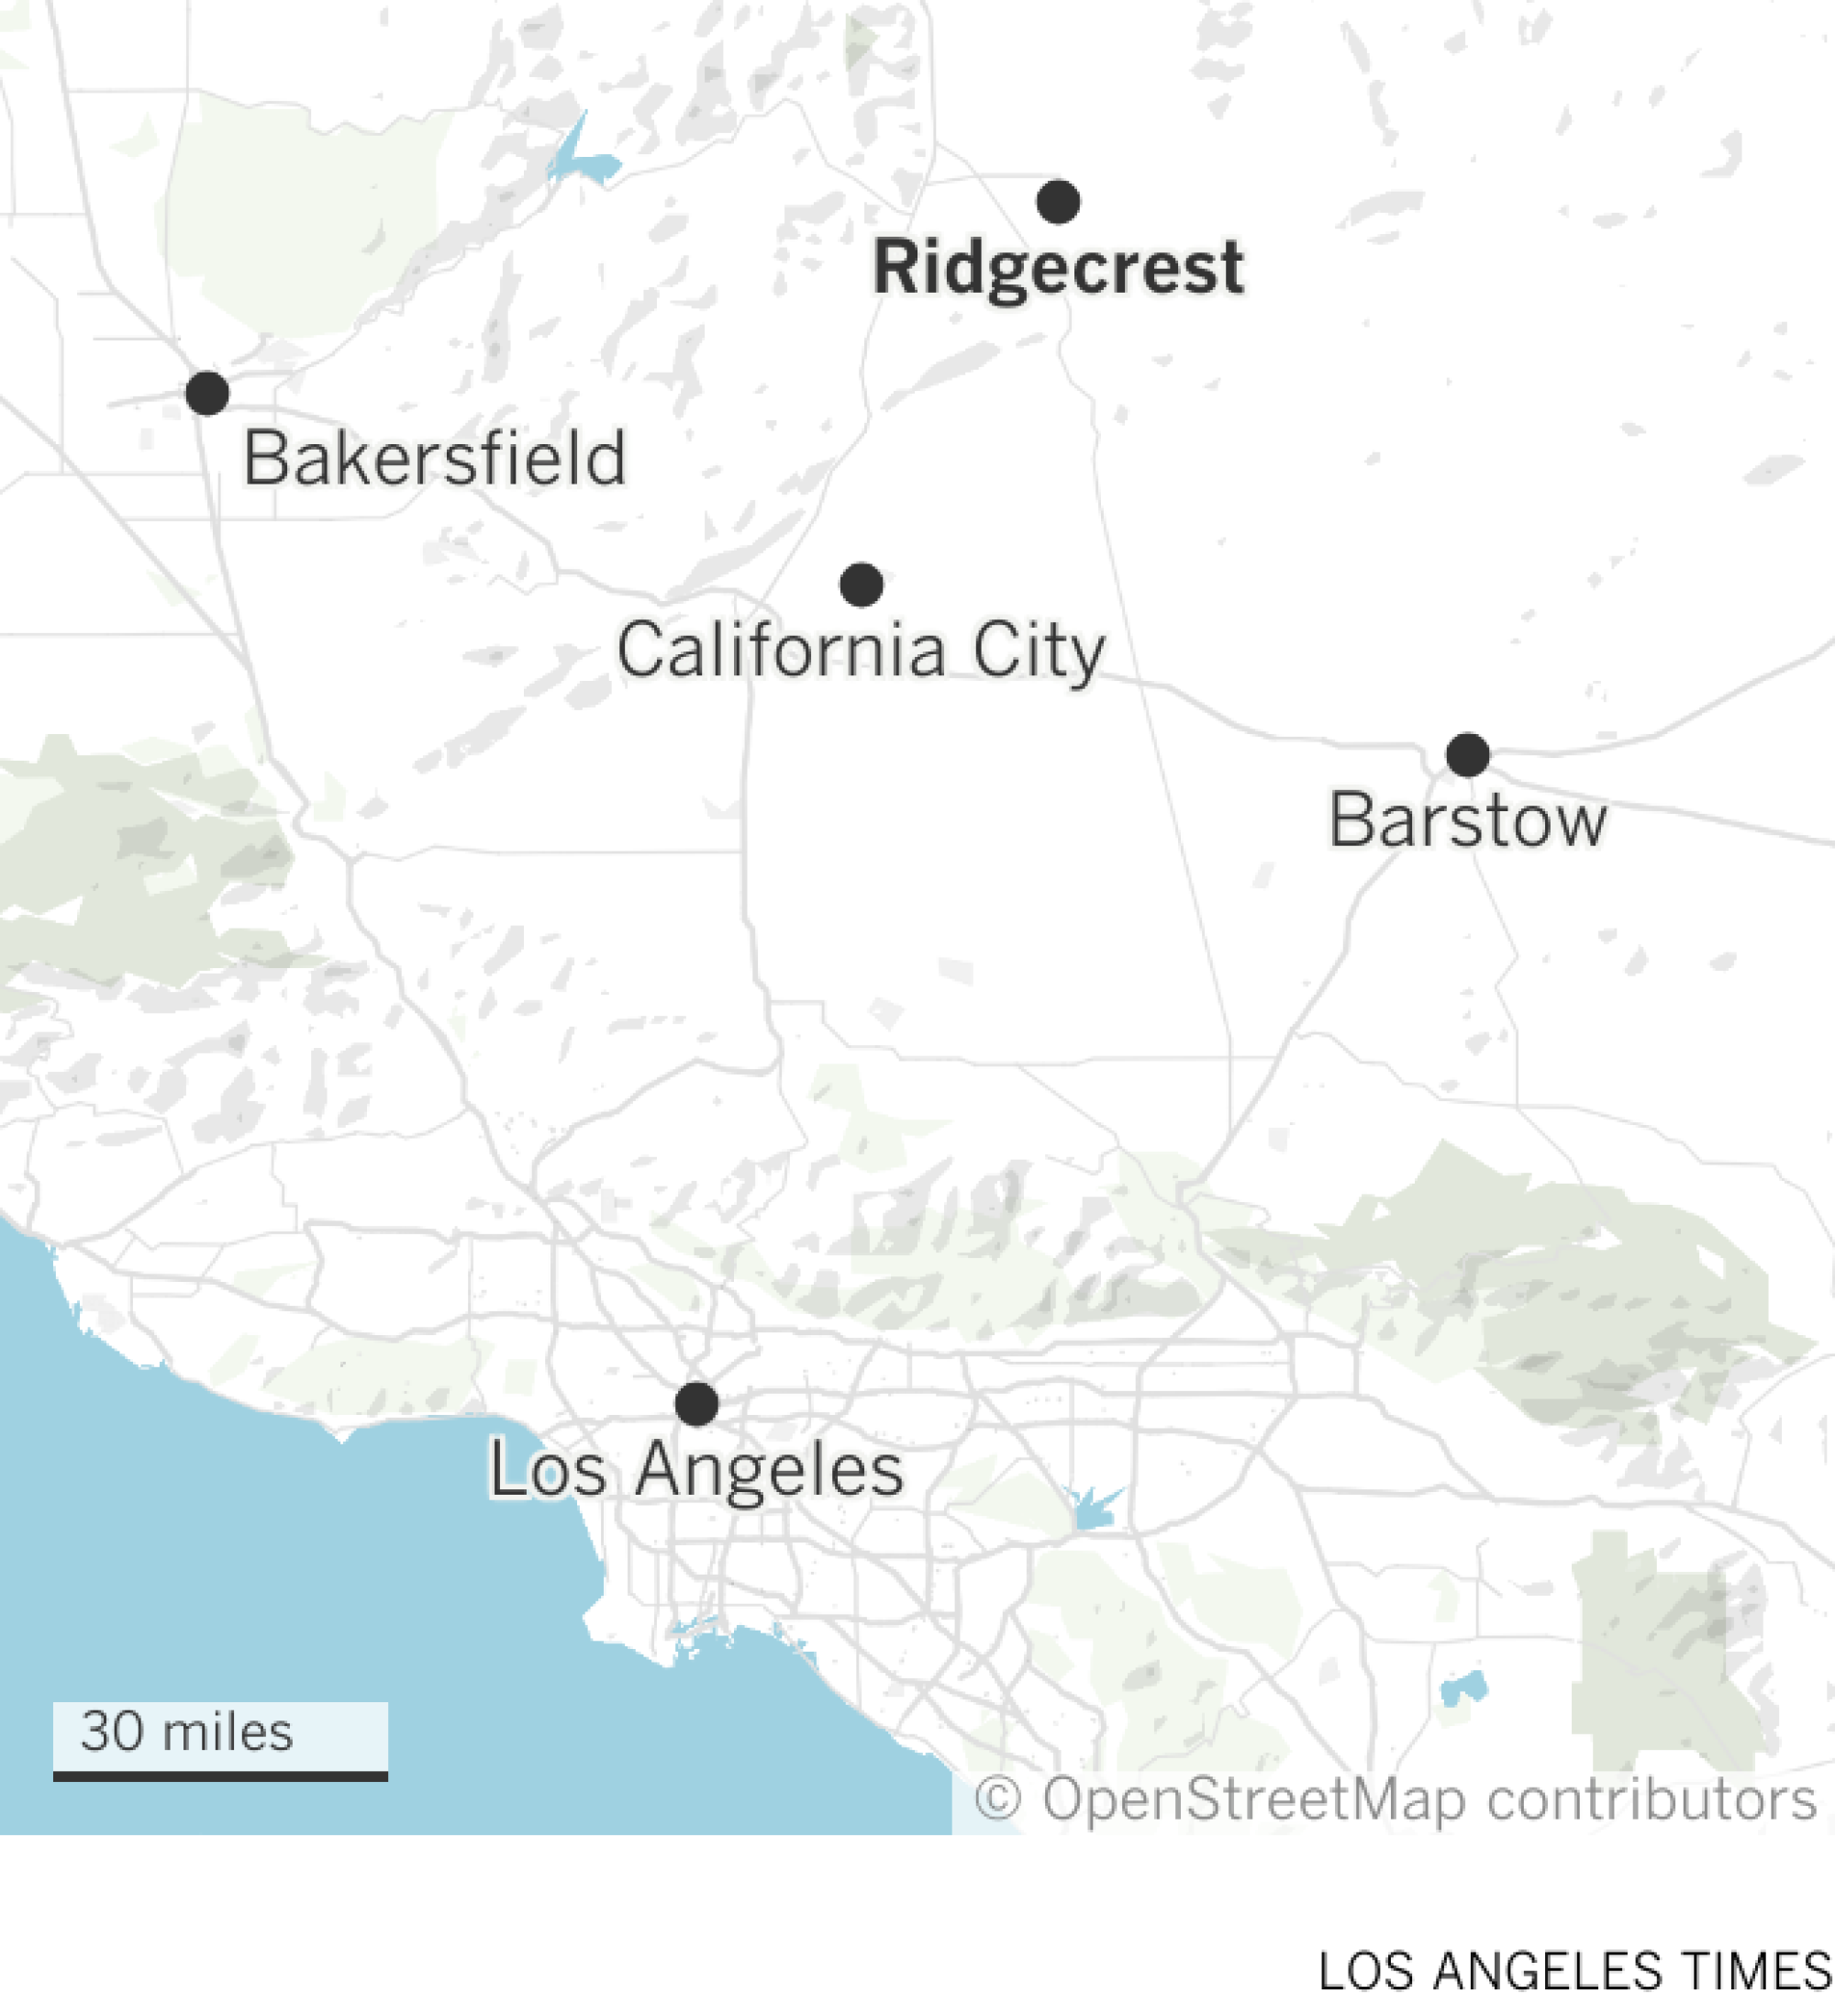 Map showing the location of Ridgecrest and California City in the desert north of Los Angeles.